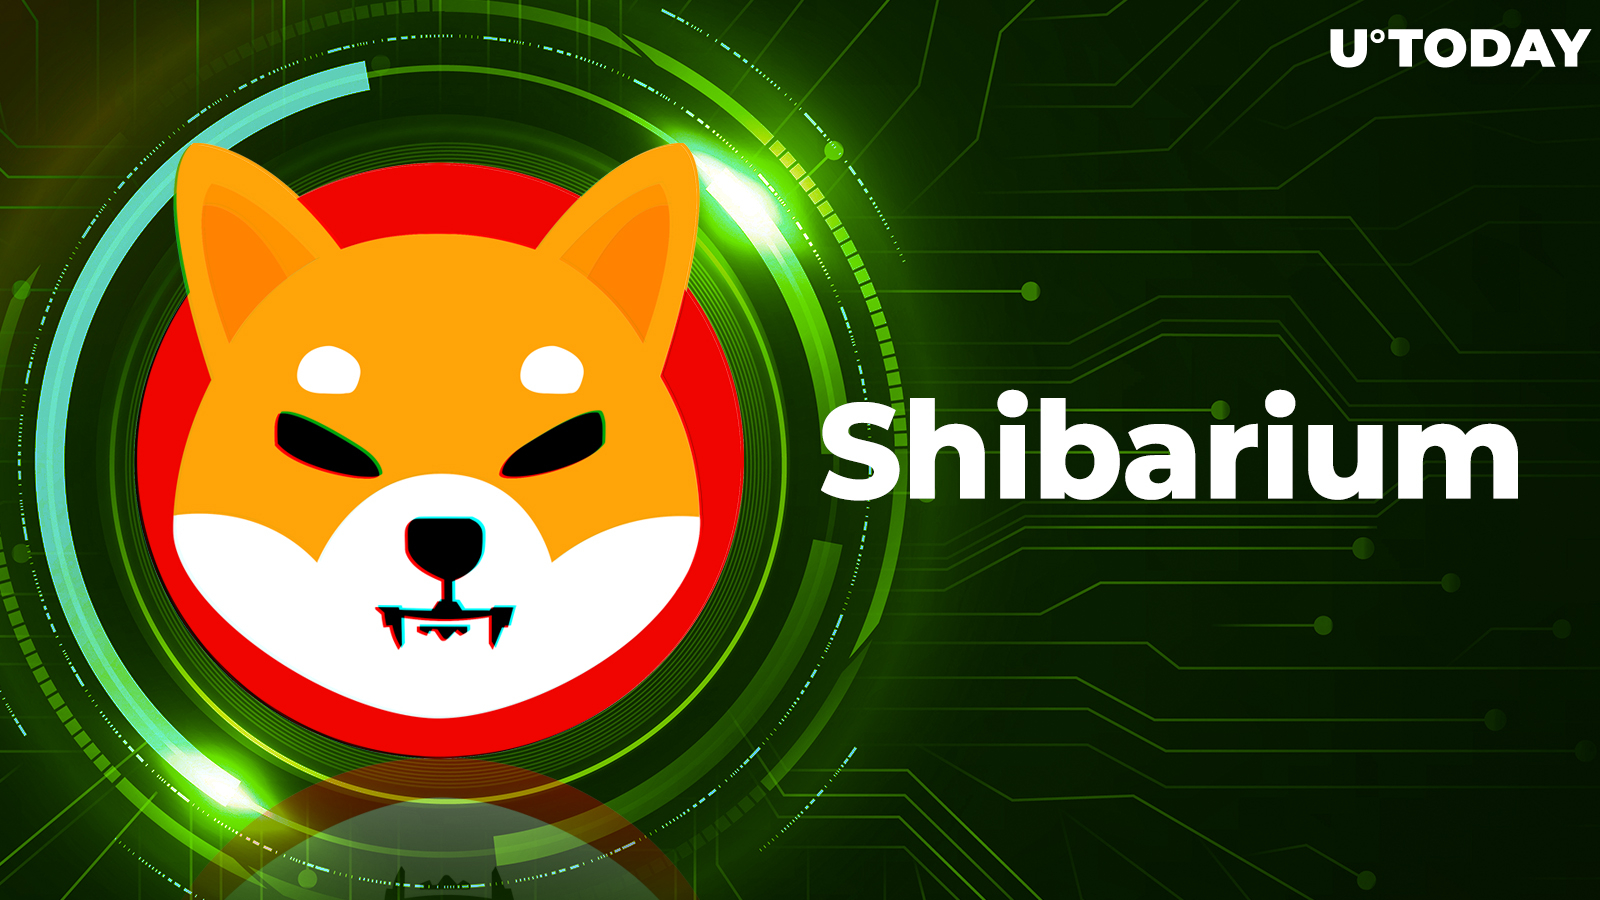 Shiba Inu: New Shibarium Scanner “Up and Running” as Transactions Top 700,000